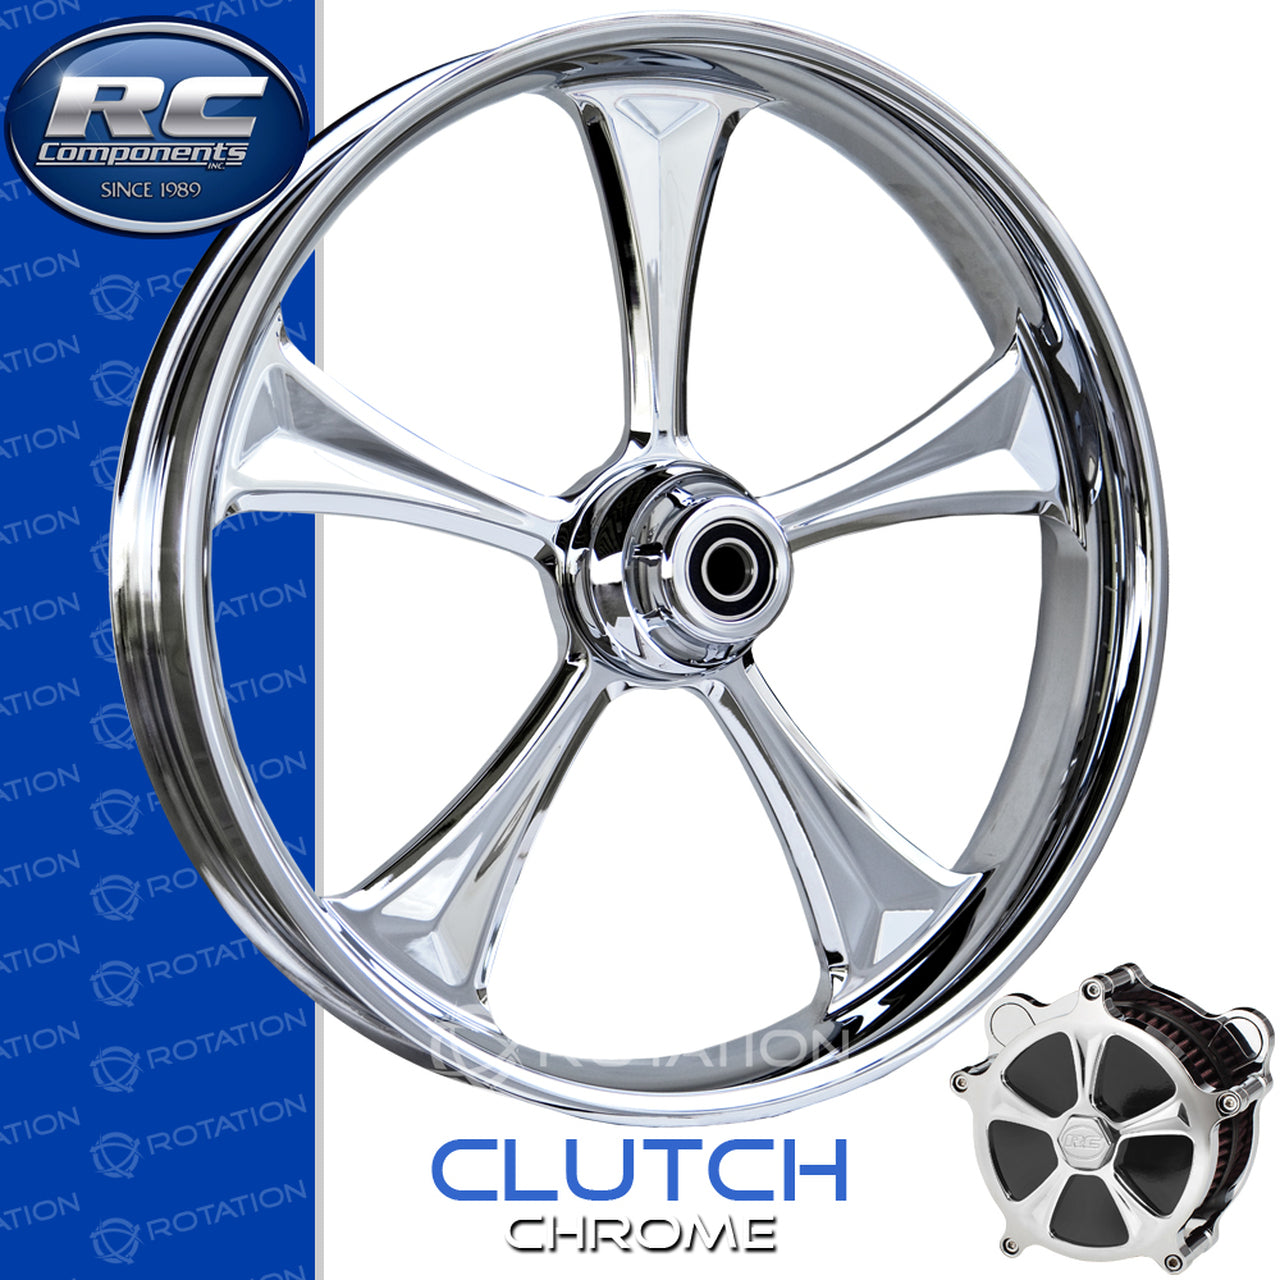 RC Components Clutch Chrome Touring Wheel